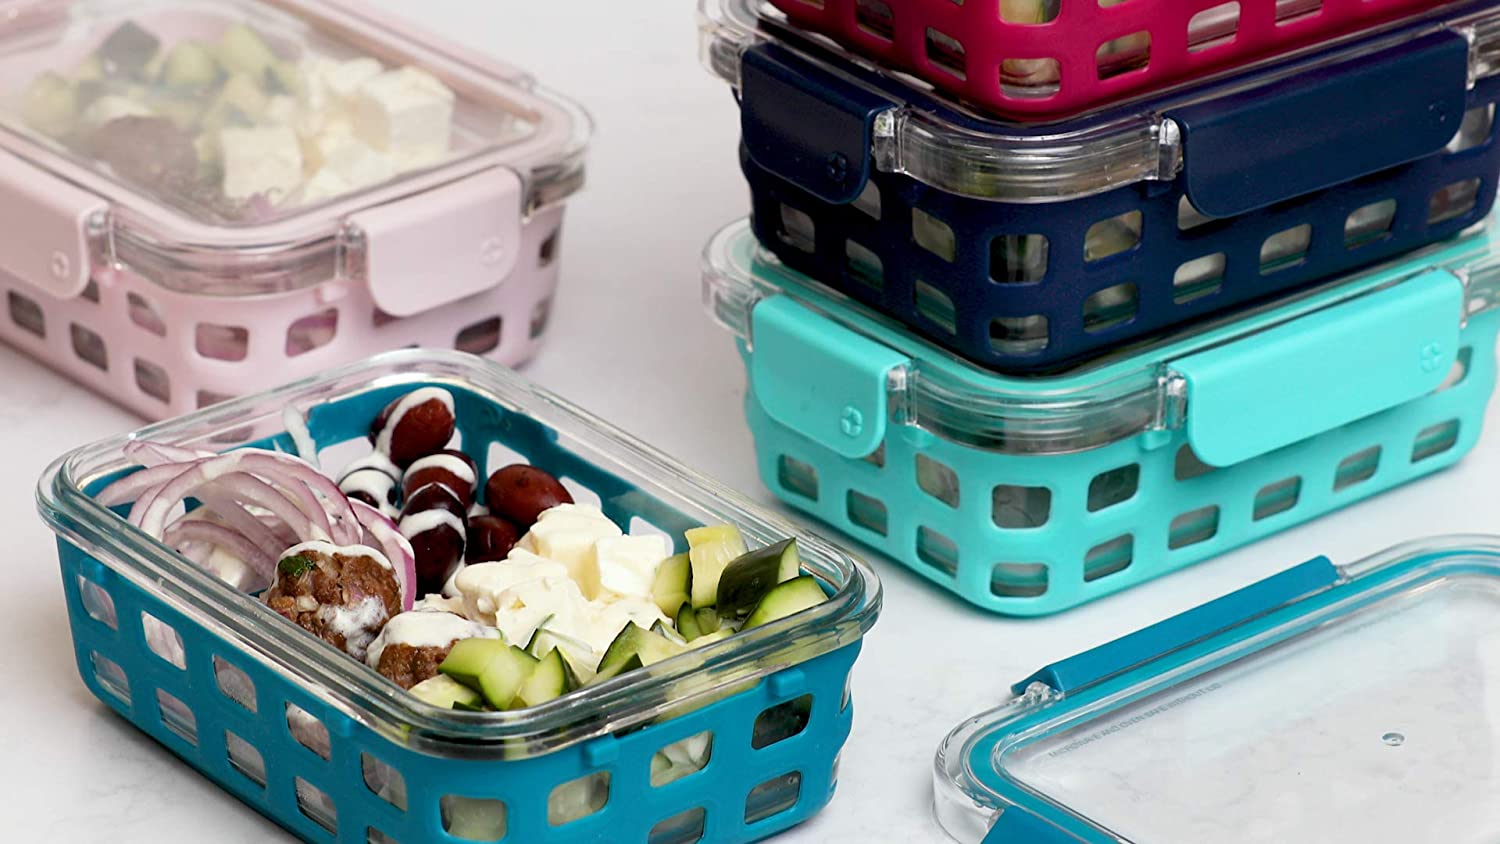 Glass Food Storage Meal Prep Containers - Glass Food Storage Meal